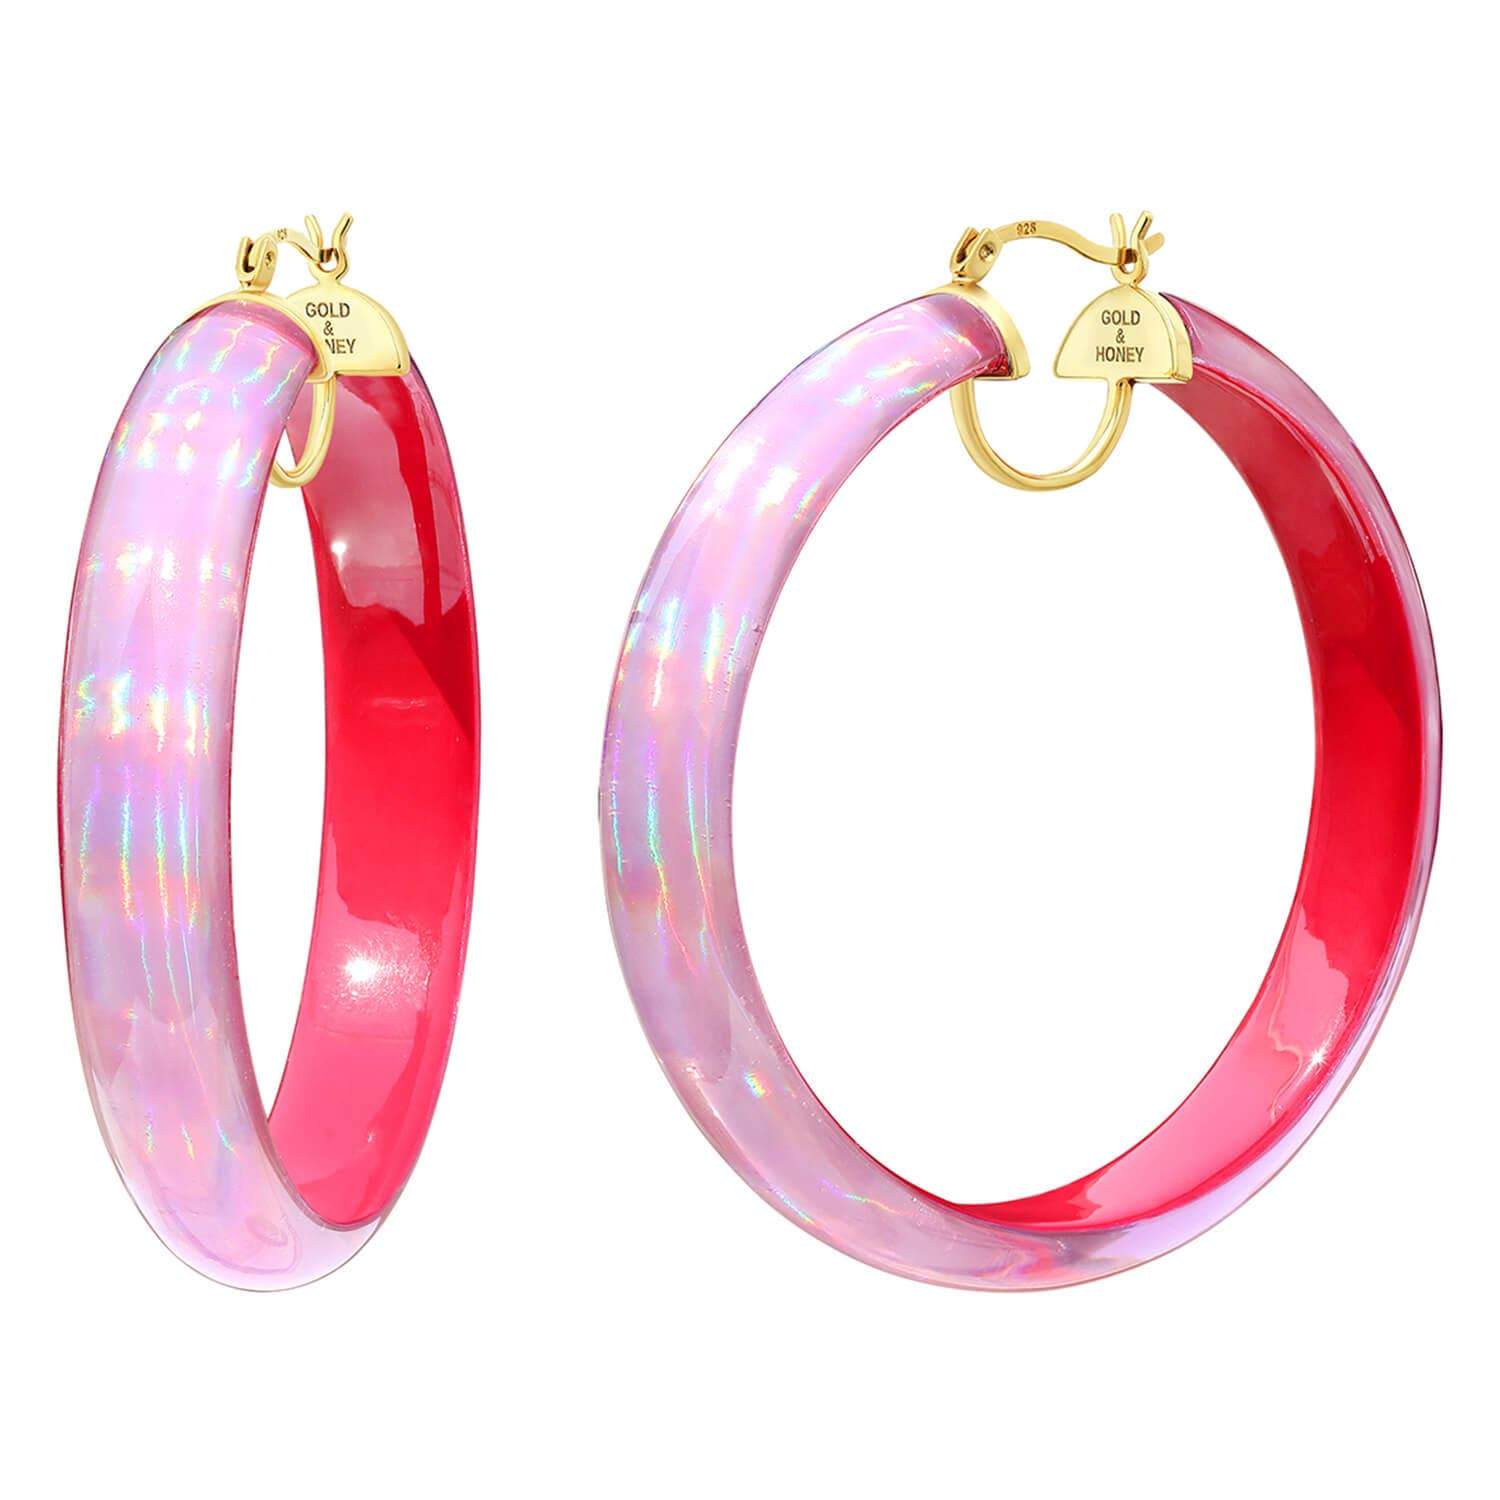 Pink Peacock Iridescent Hoops in Rave - 2.5